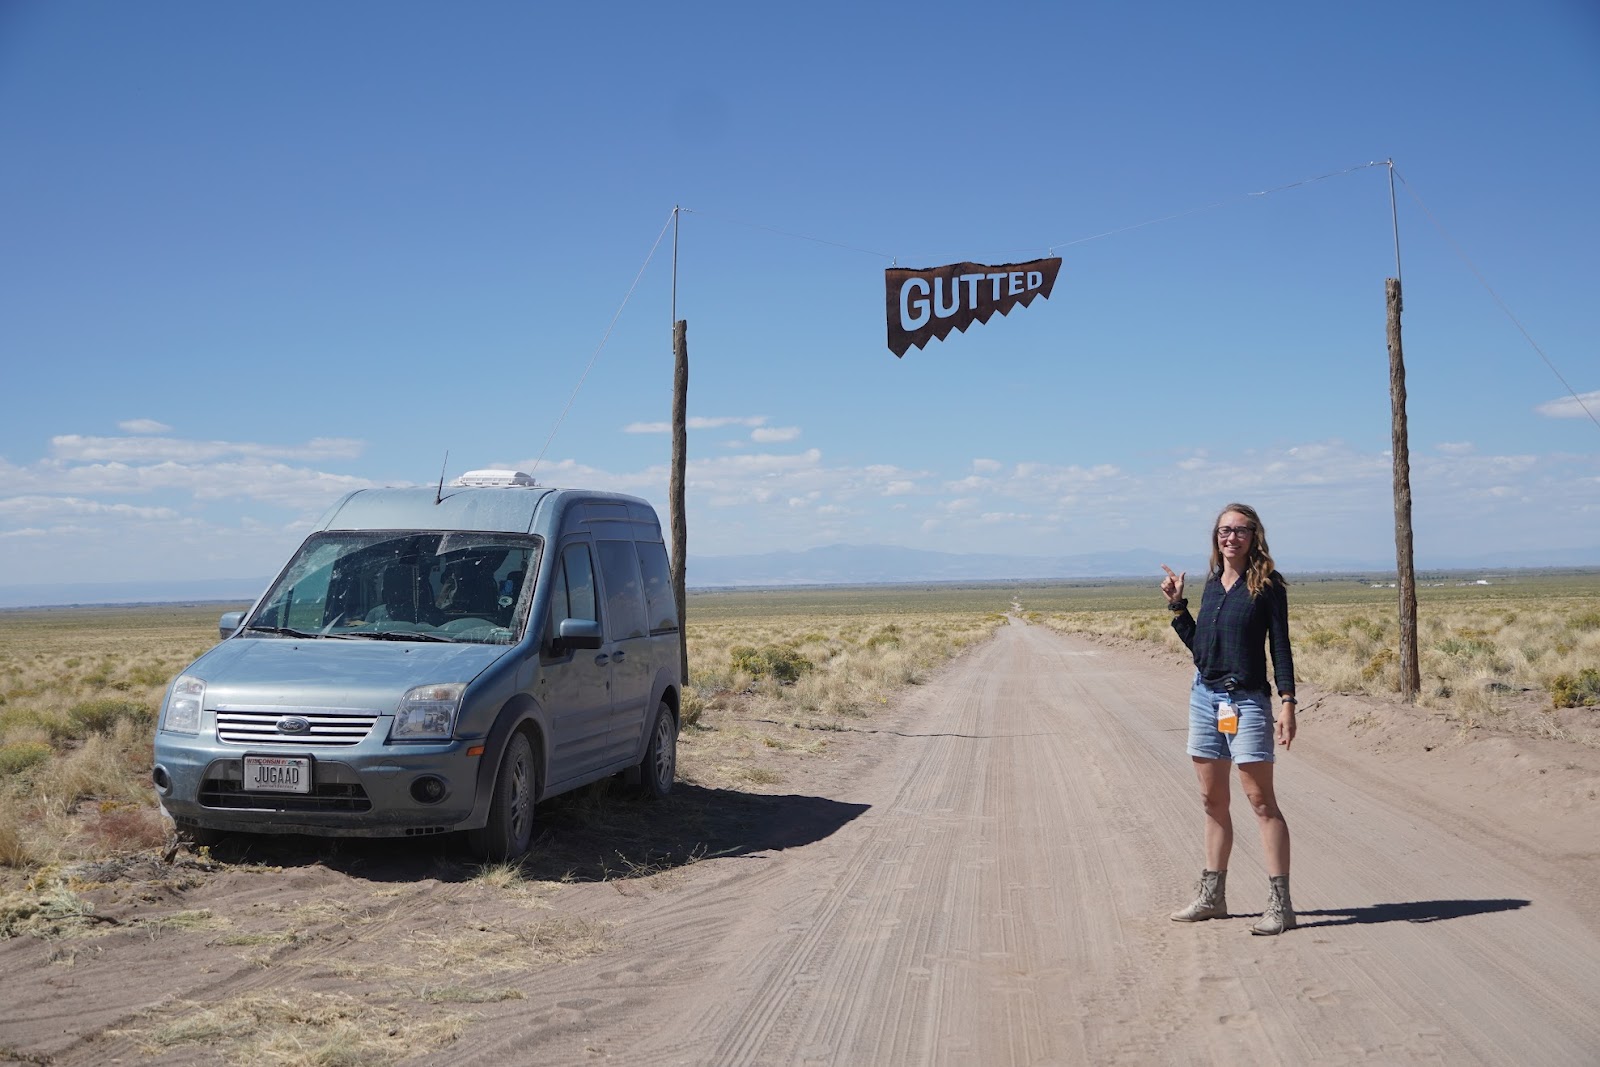 Huemer stands on a dirt road, smiling and pointing to the van beside her